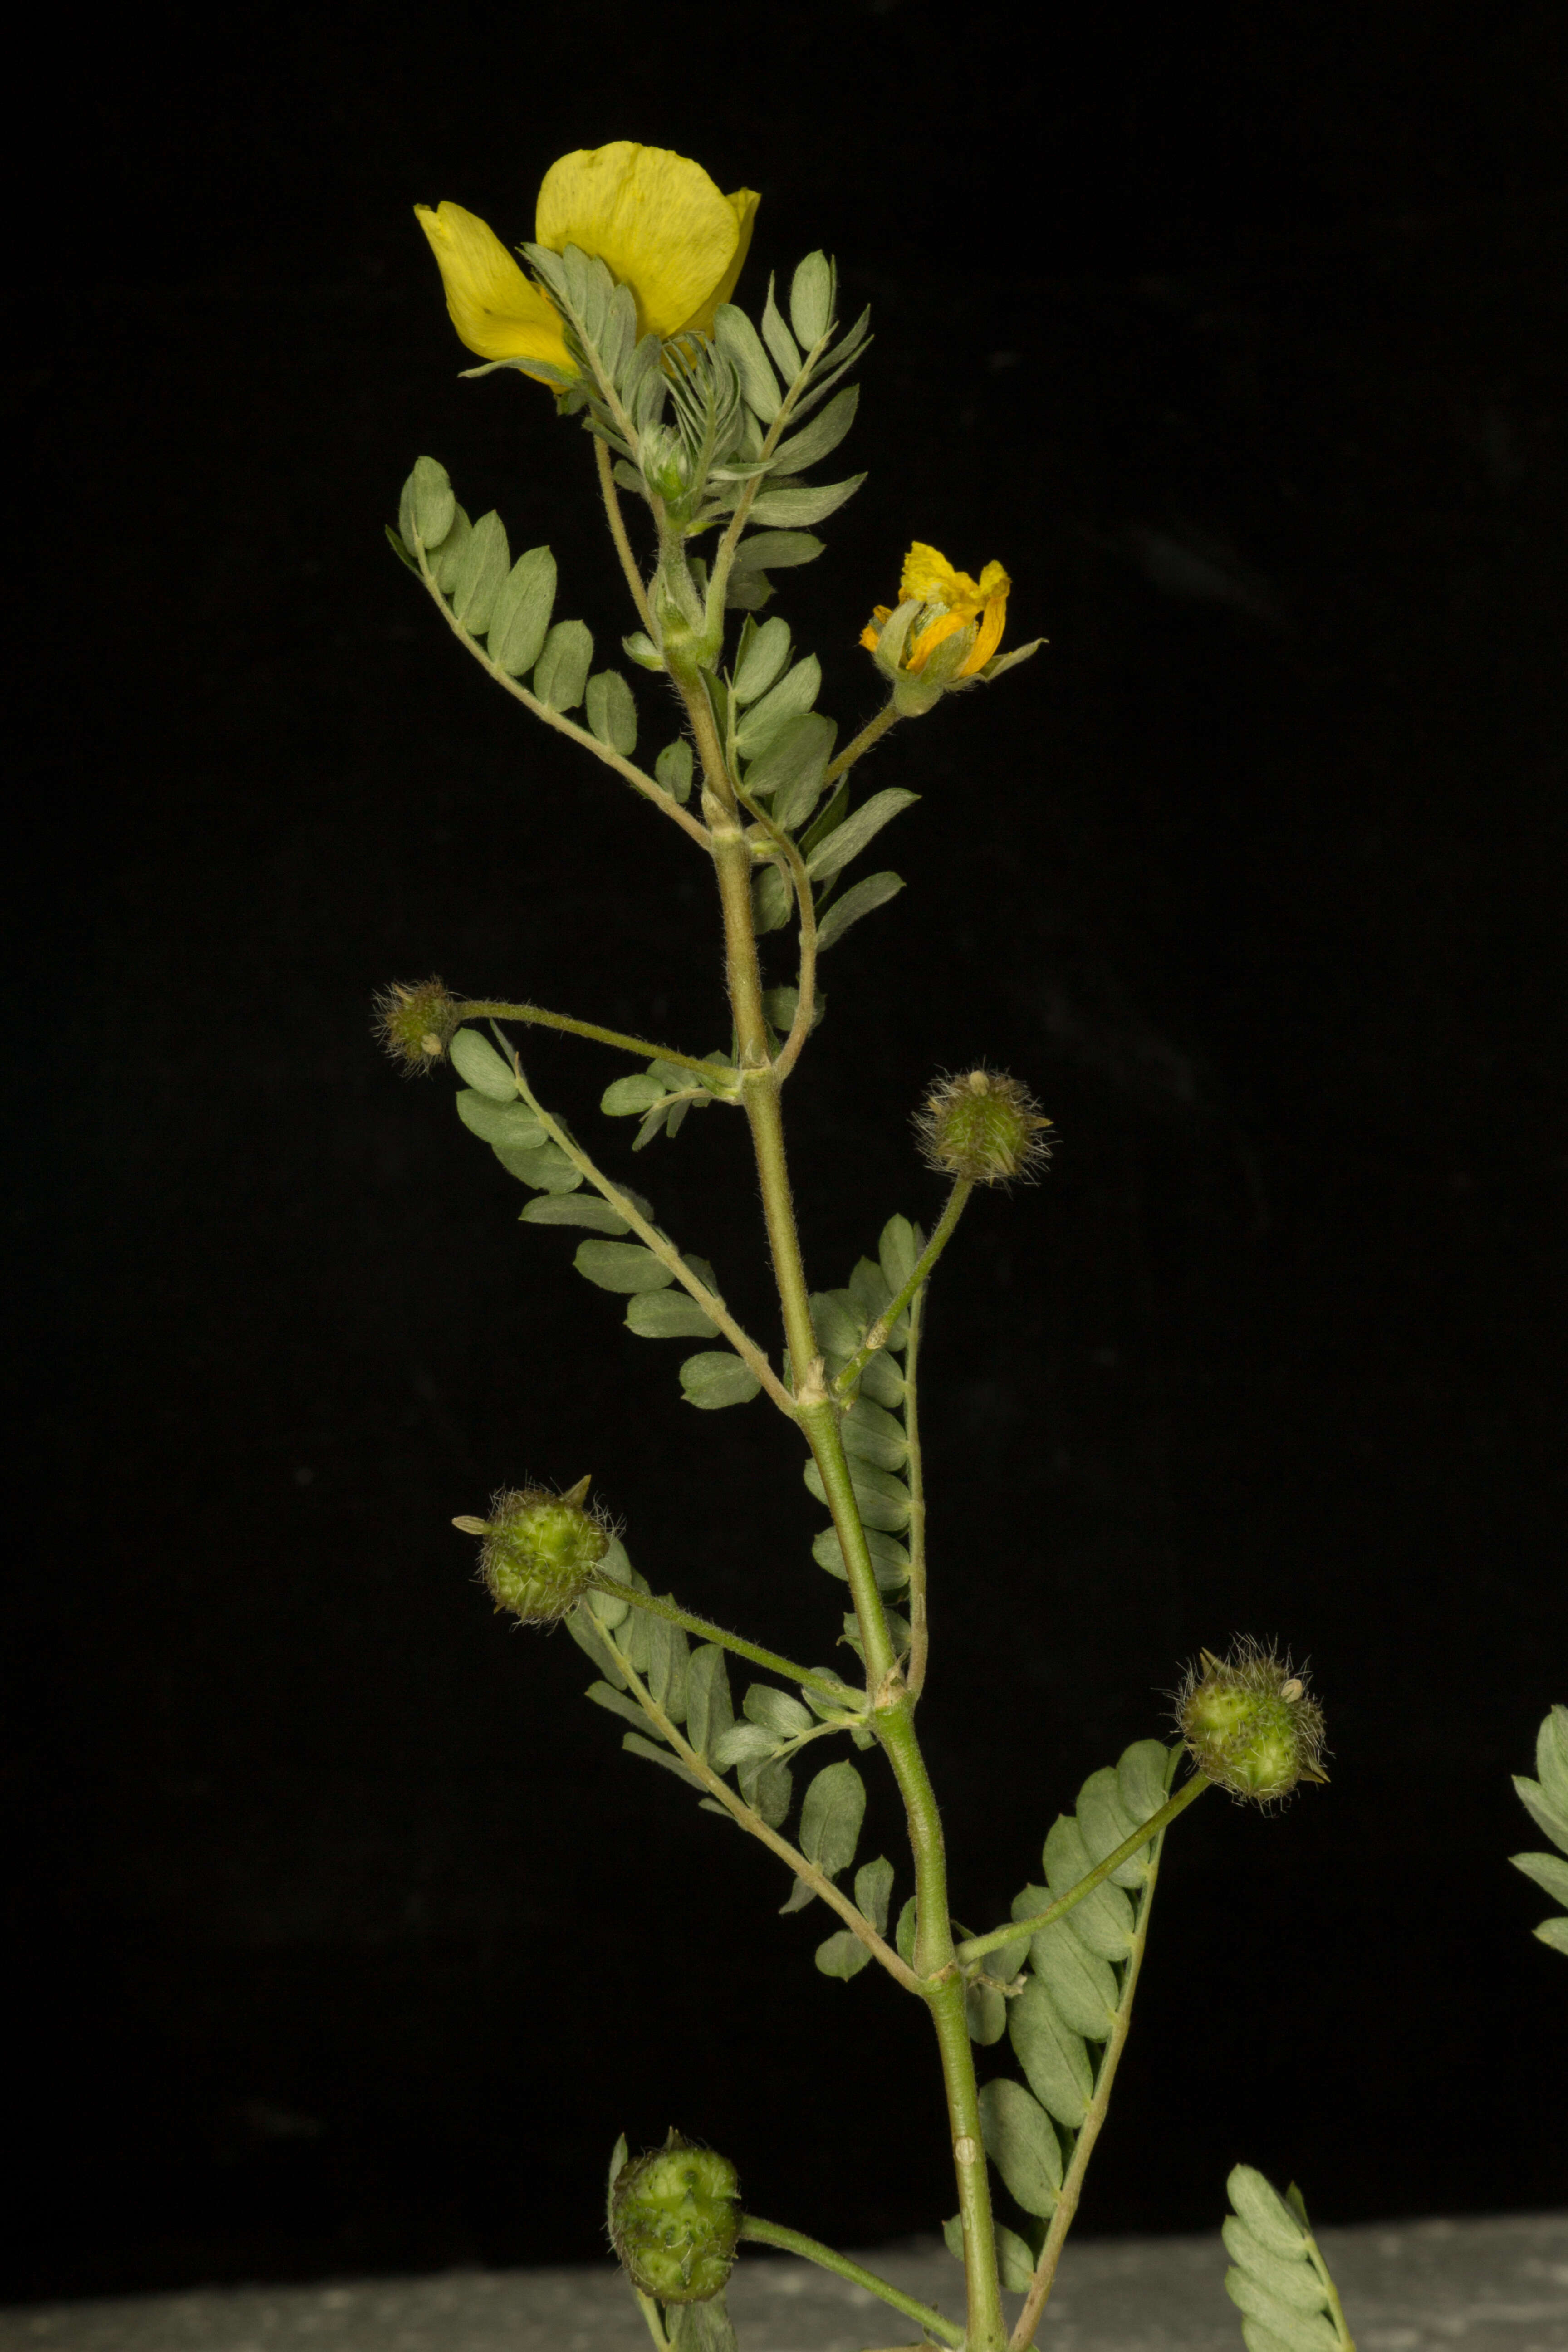 Image of Jamaican feverplant